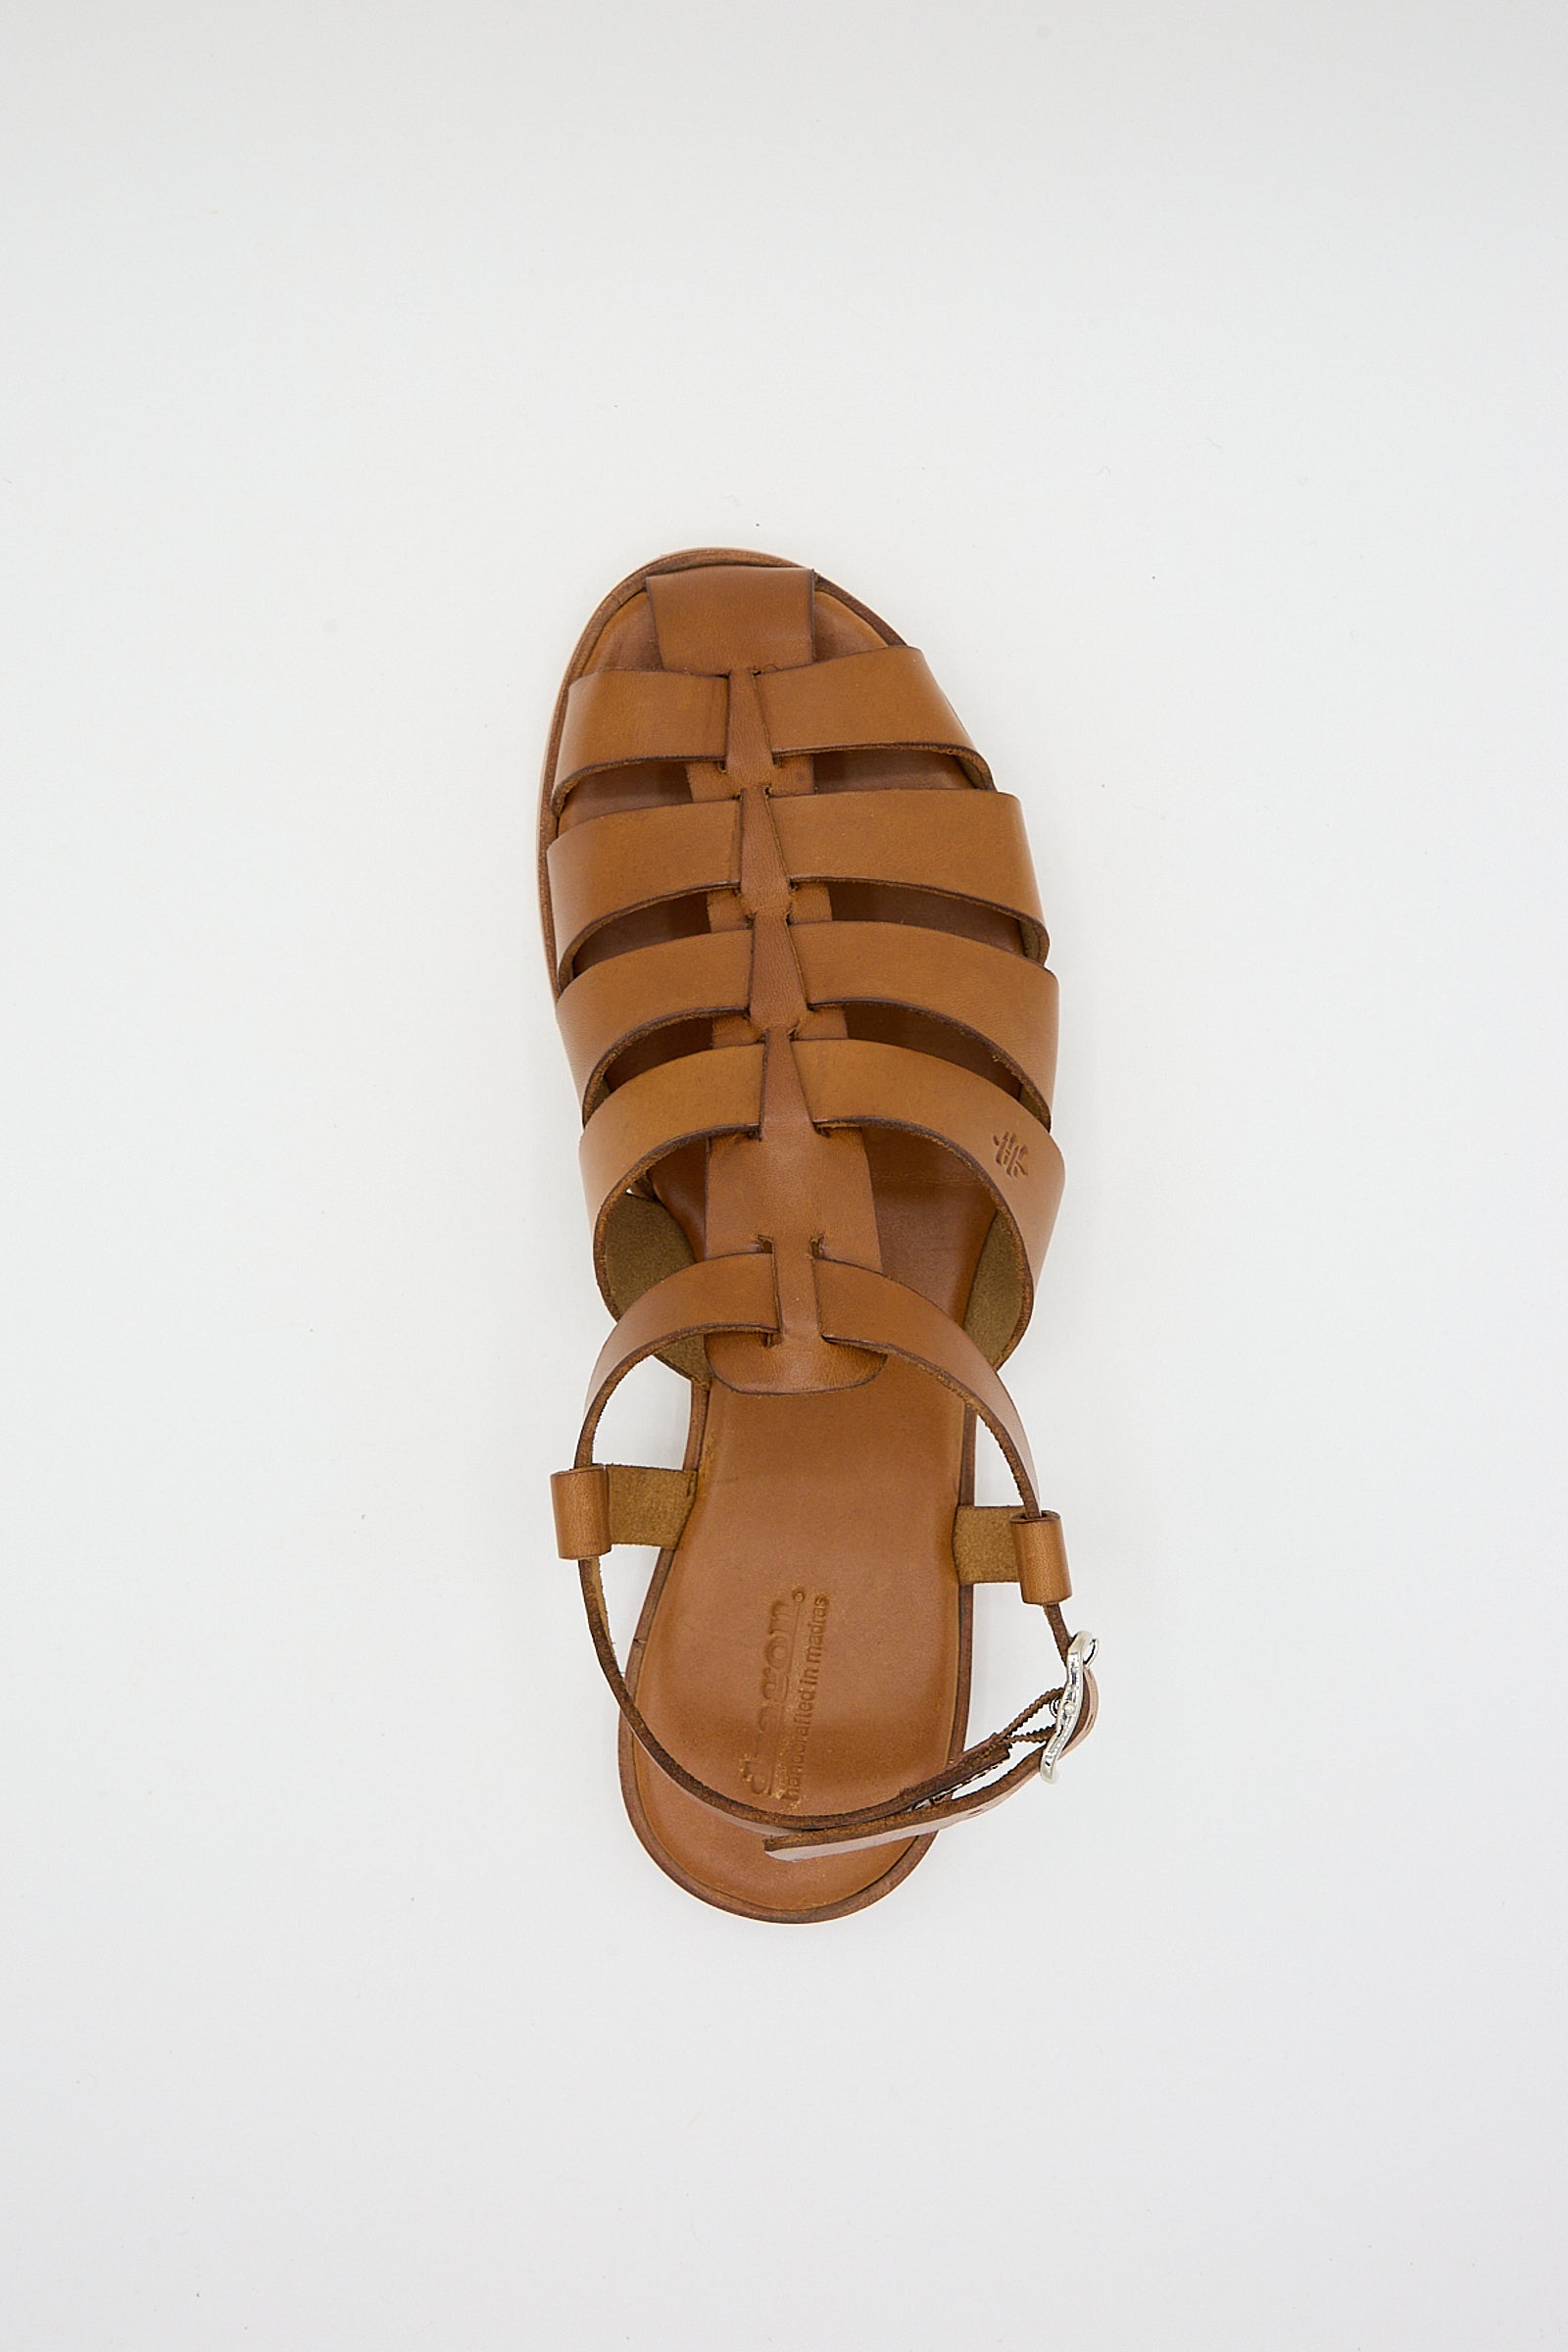 Top view of a single tan Pescador sandal by Dragon Diffusion on a white background.